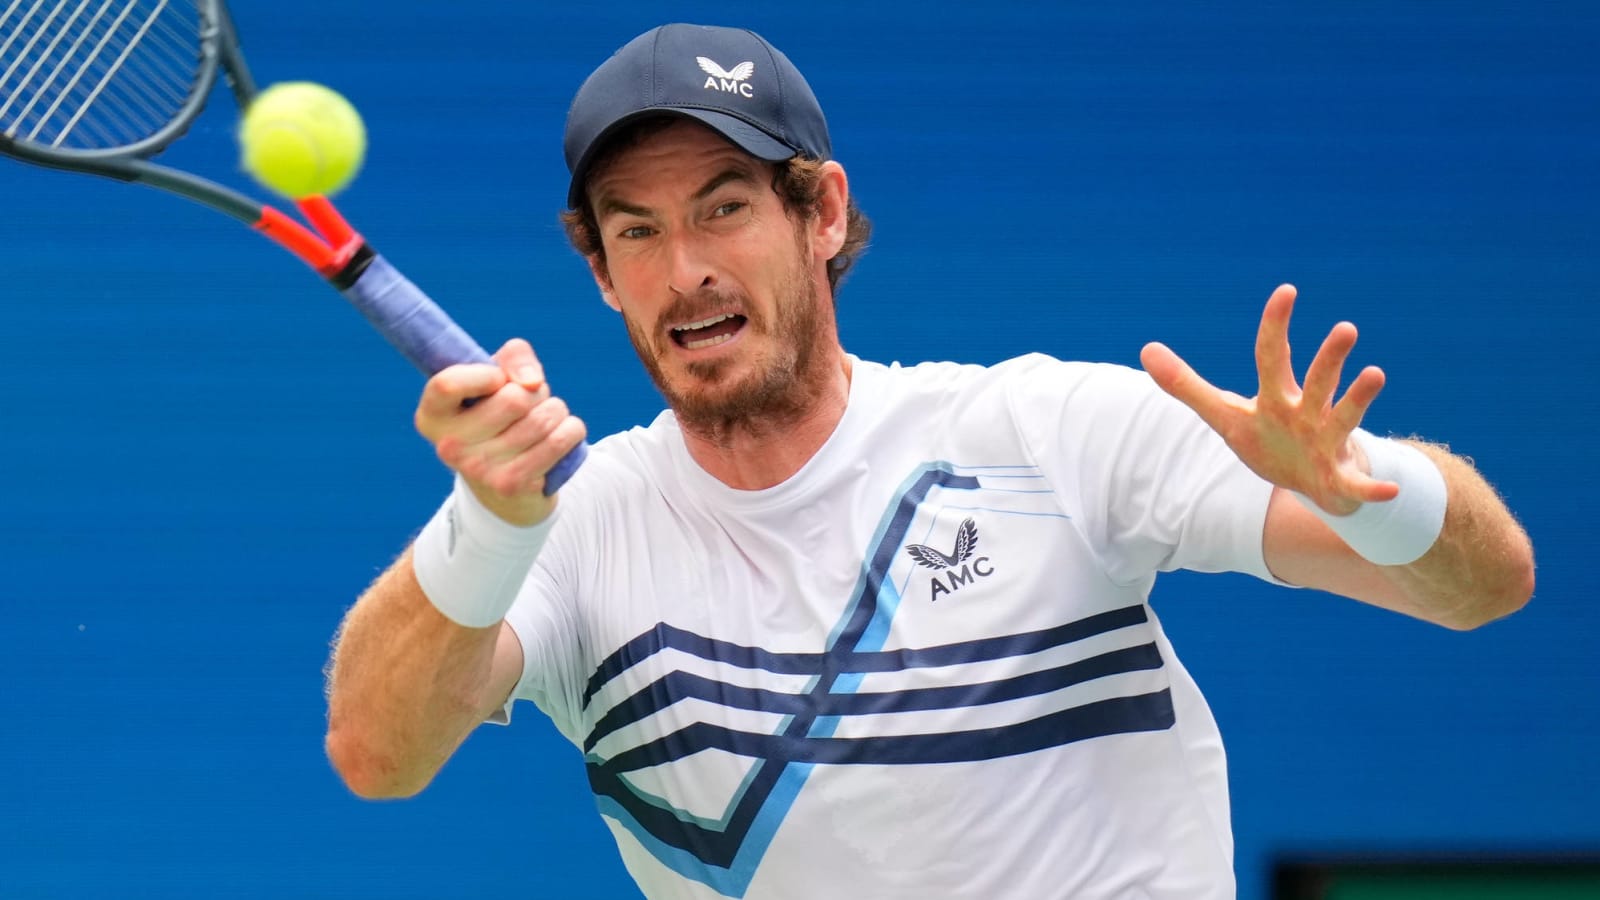 Andy Murray shares unfortunate story of stolen wedding ring